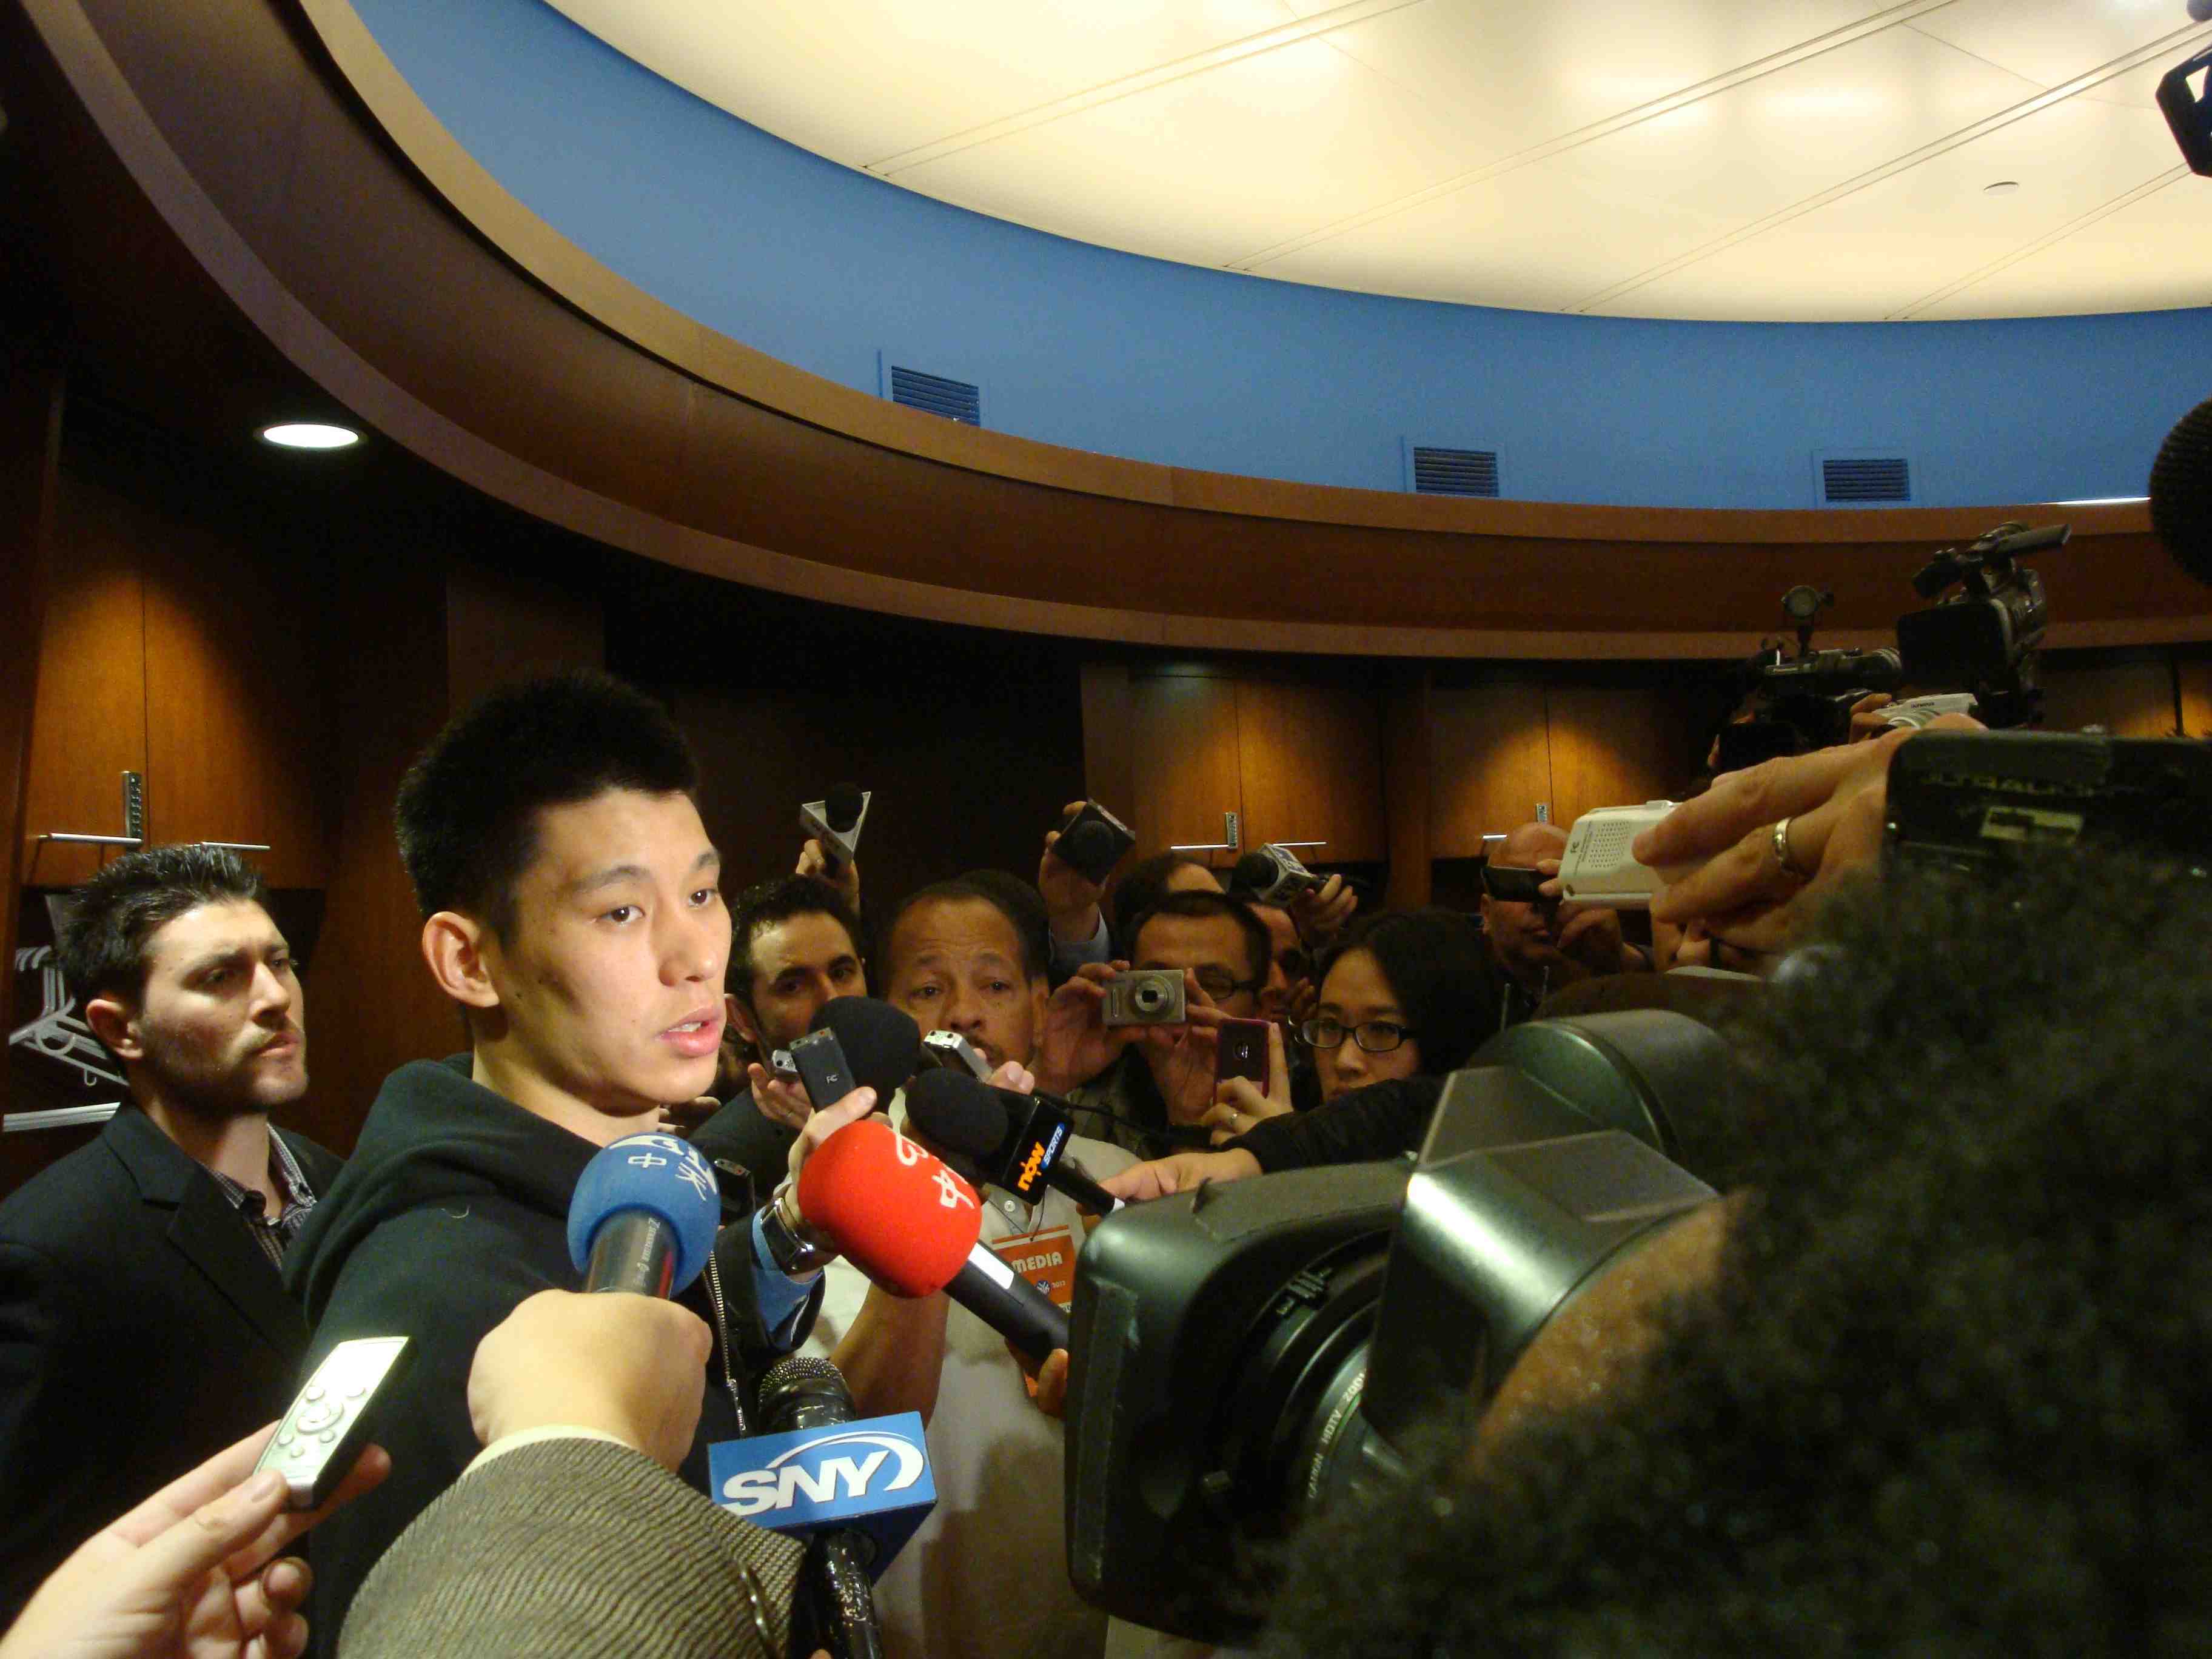 Jeremy Lin to have knee surgery next week - expected to be sidelined for the rest of the season.